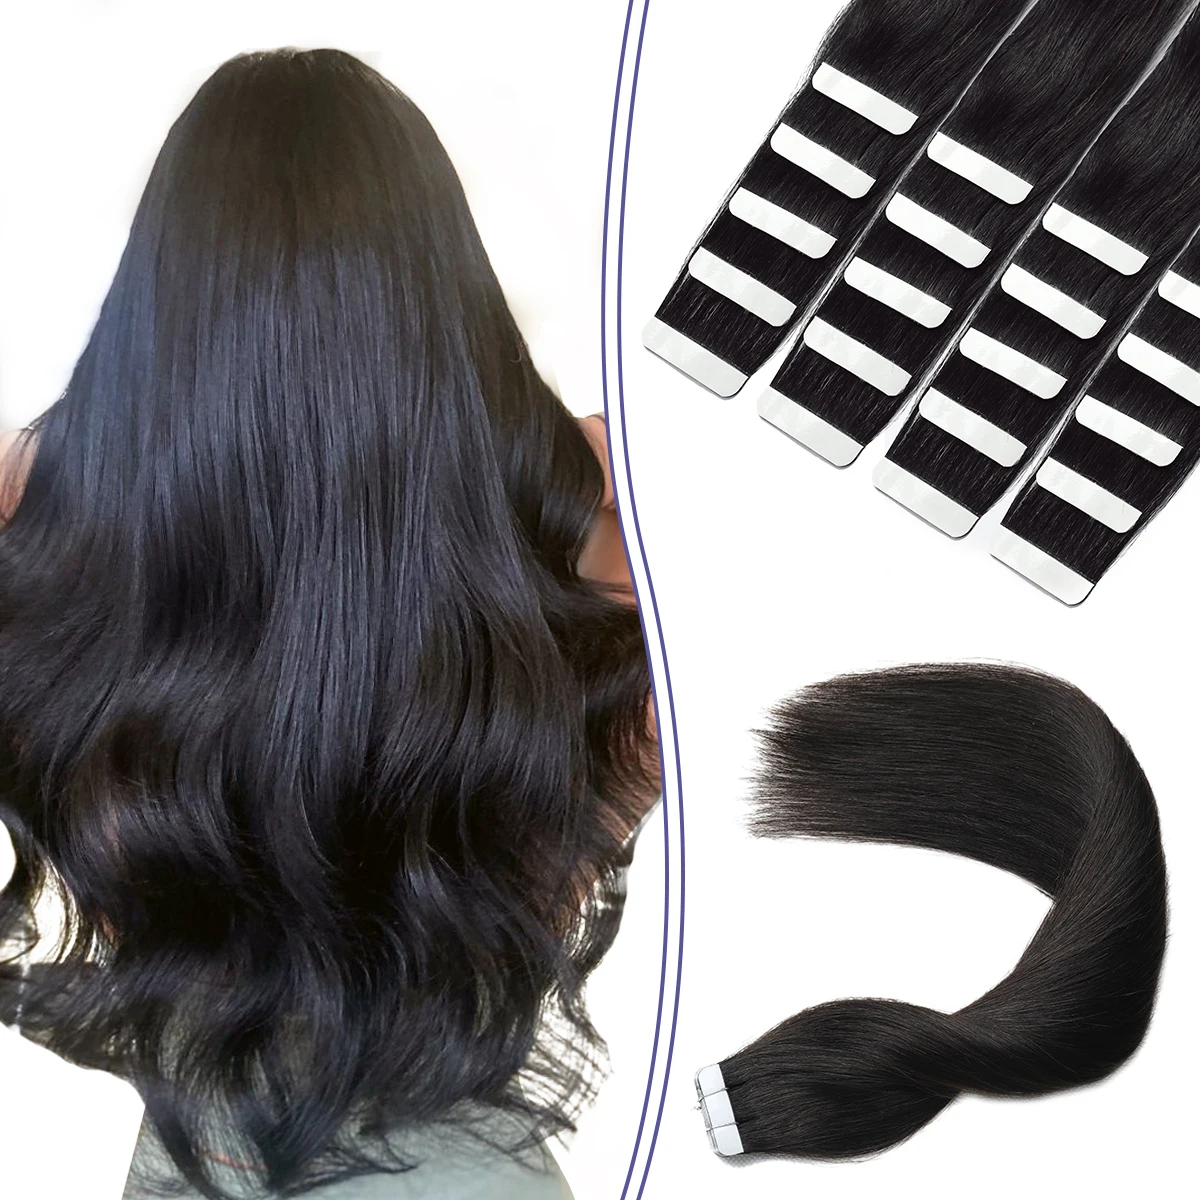 

Tape in Human Hair Extensions Natural Black#1B Color Real Human Hair Extensions Tape in Hair Soft Skin Weft Straight